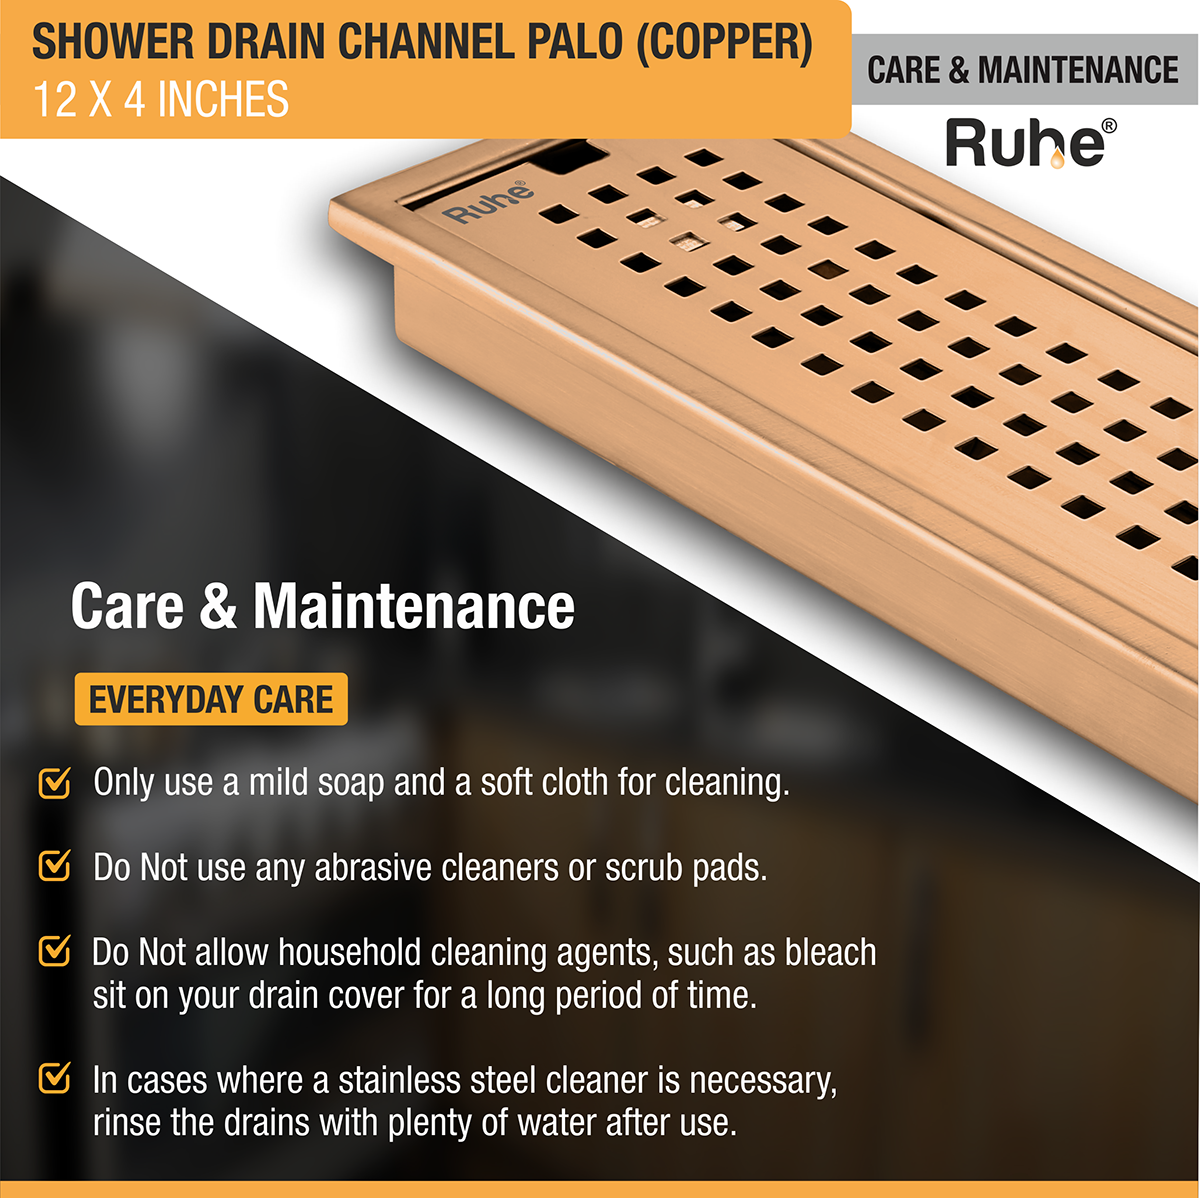 Palo Shower Drain Channel (12 x 4 Inches) ROSE GOLD/ANTIQUE COPPER care and maintenance